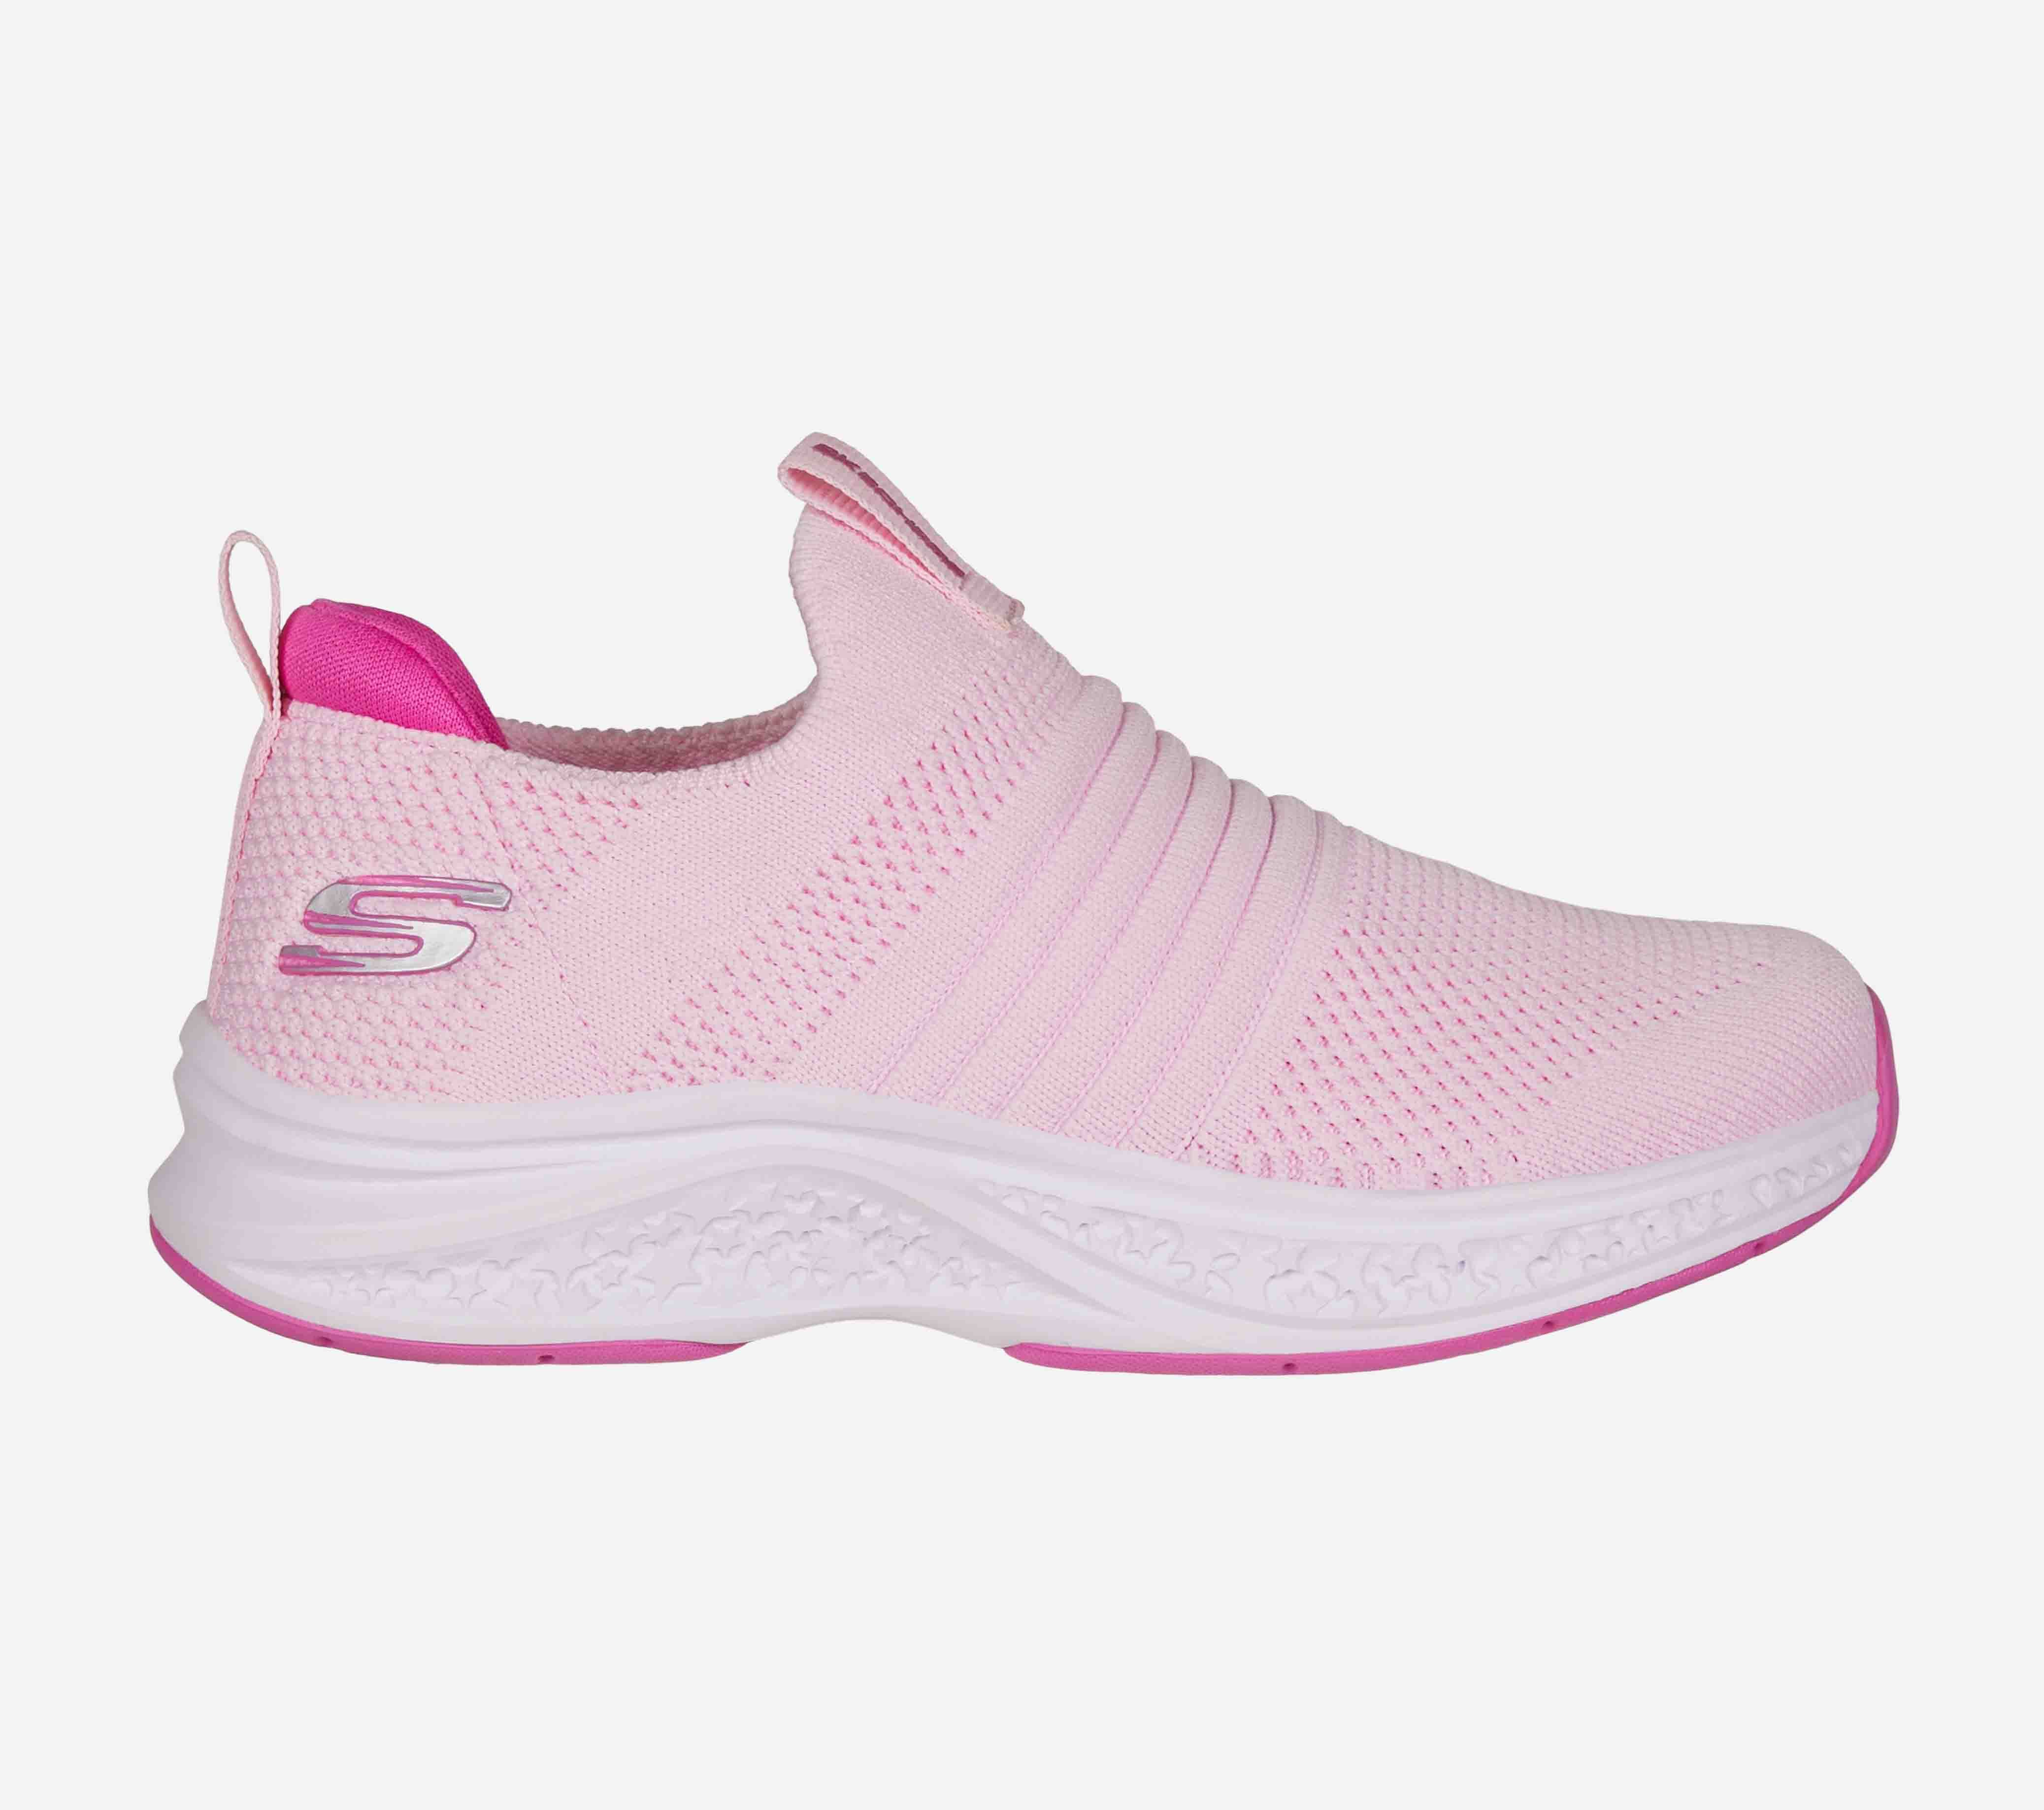 STAR SPEEDER - SWEET VISION, LIGHT PINK/HOT PINK Footwear Lateral View